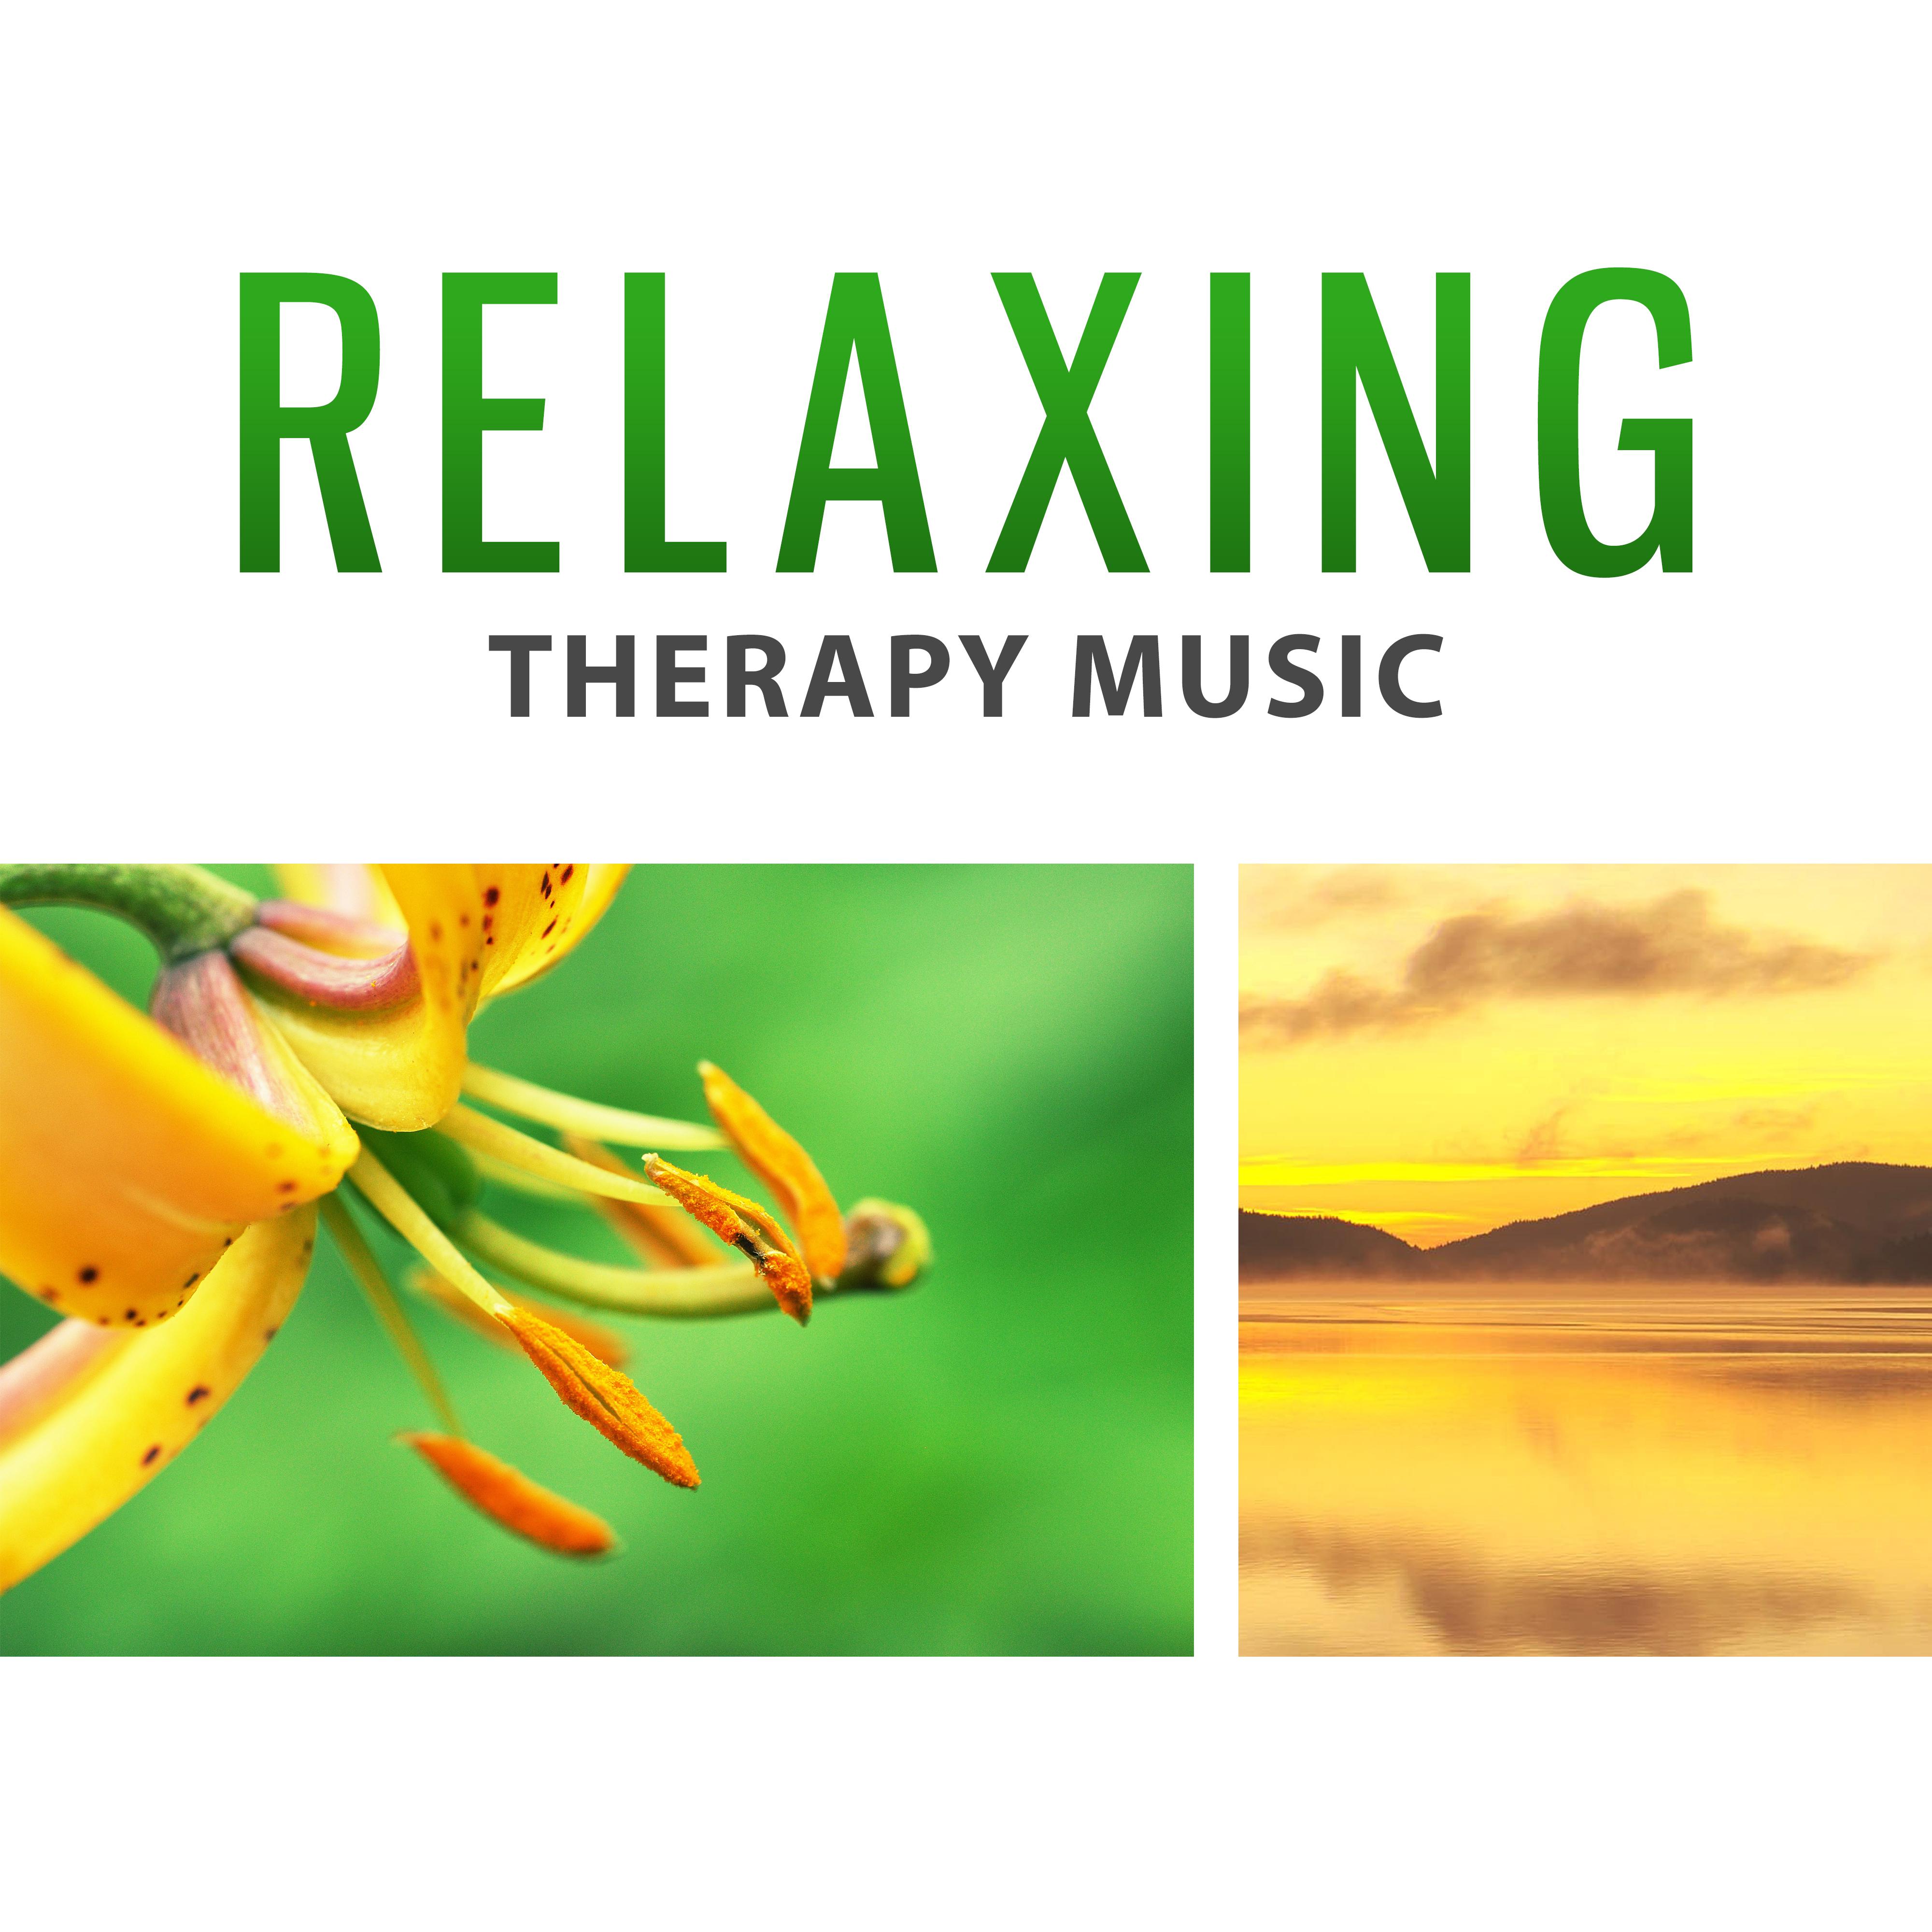 Relaxing Therapy Music – Gentle, Nature Sounds for Relaxation, Stress Relief, Calm Mind, Deep Sleep, Soothing Piano, Sounds of Birds, Rest